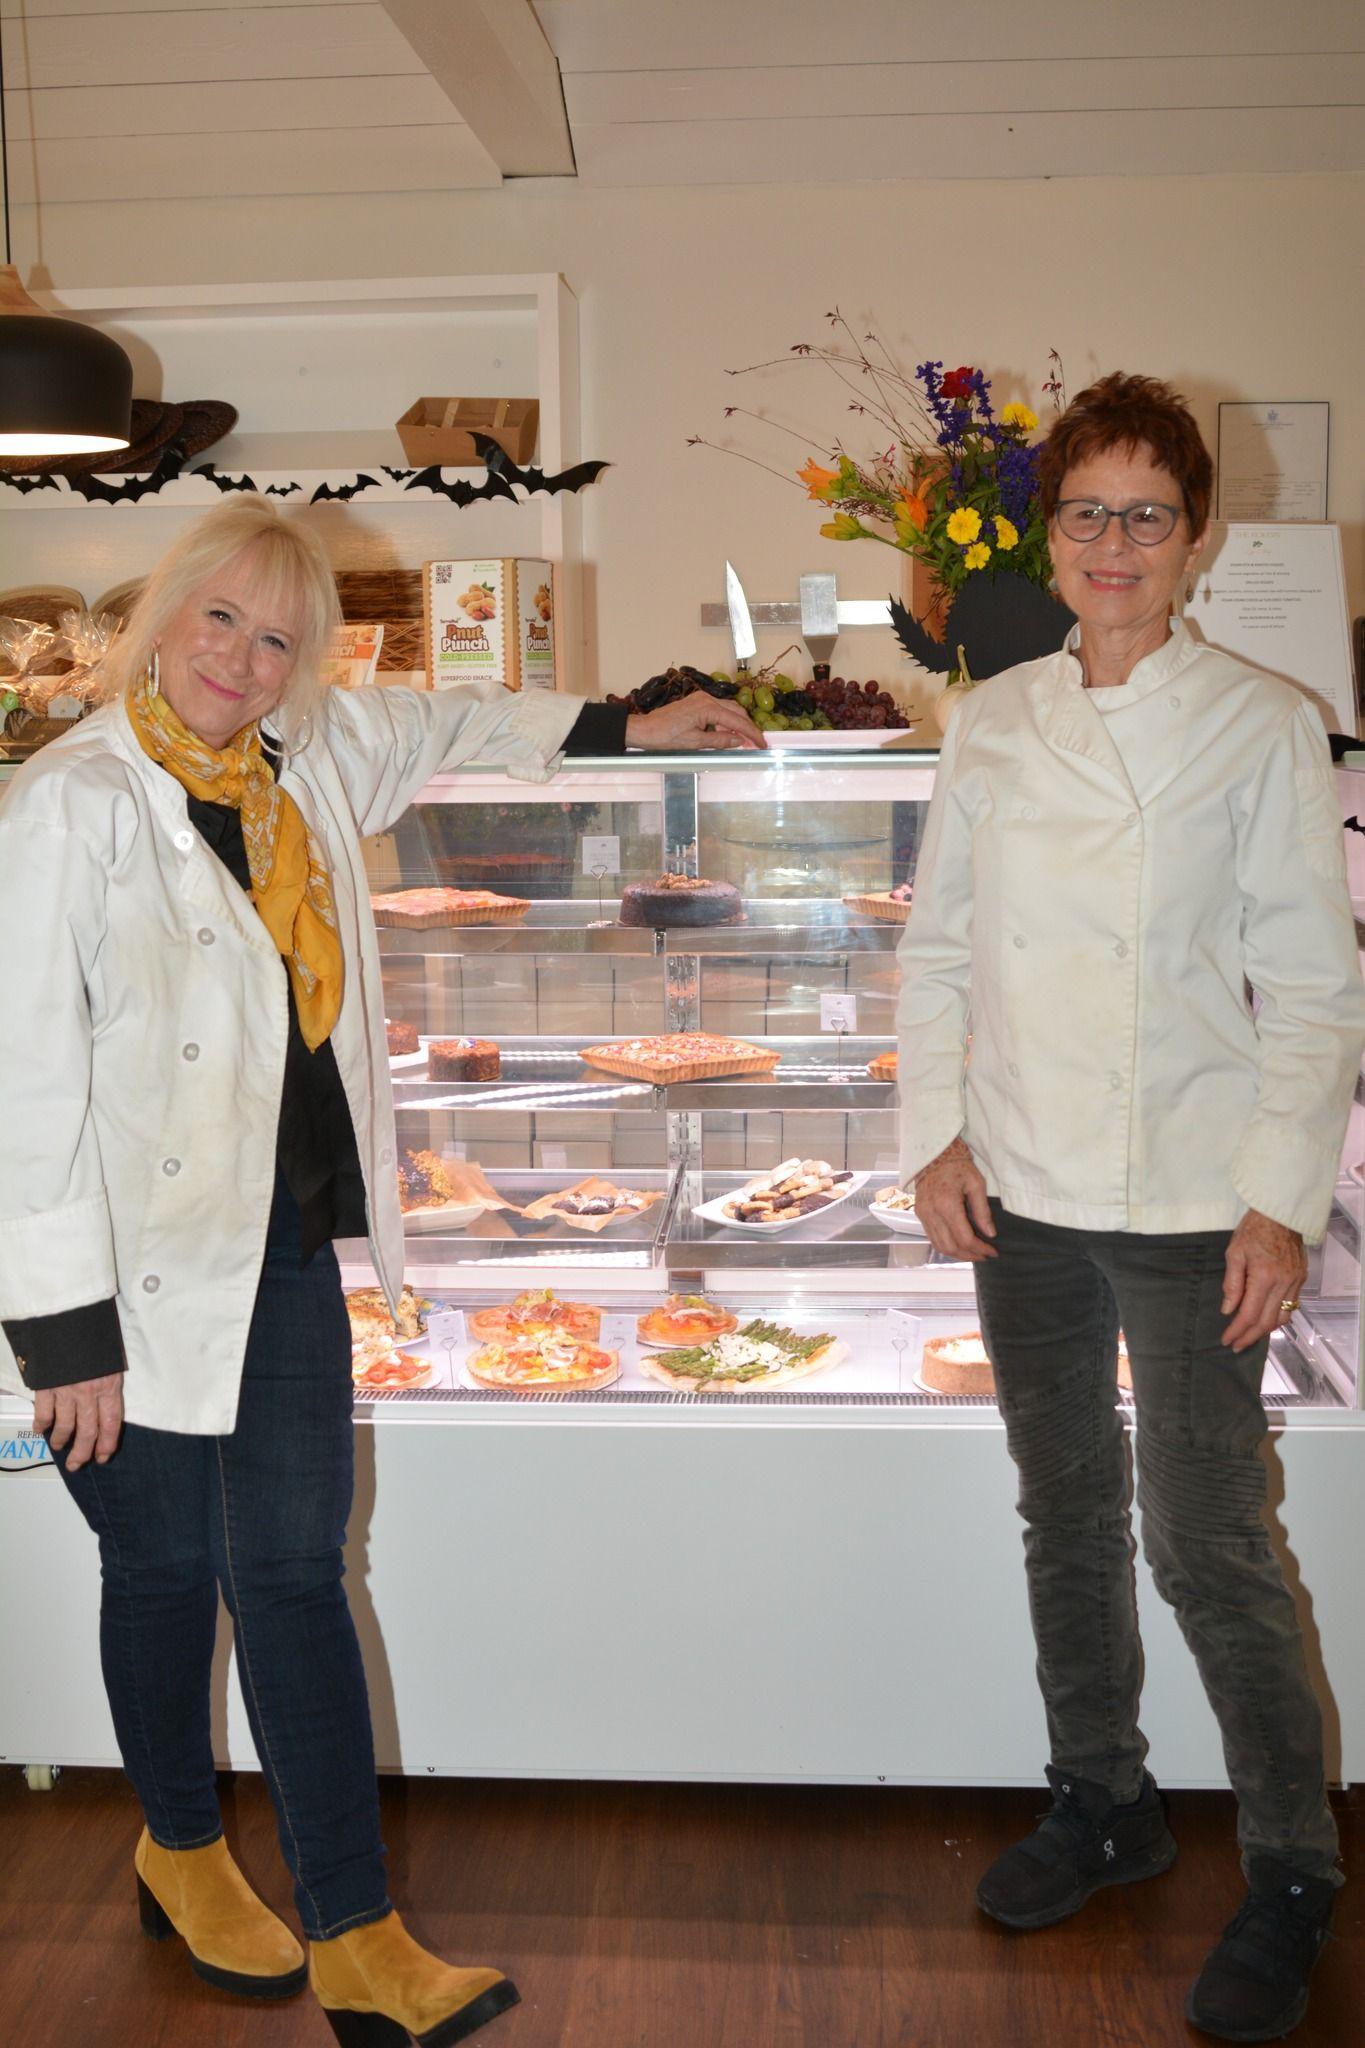 Image of Cynthia and Trudy at the Cookery in East Hampton, New York